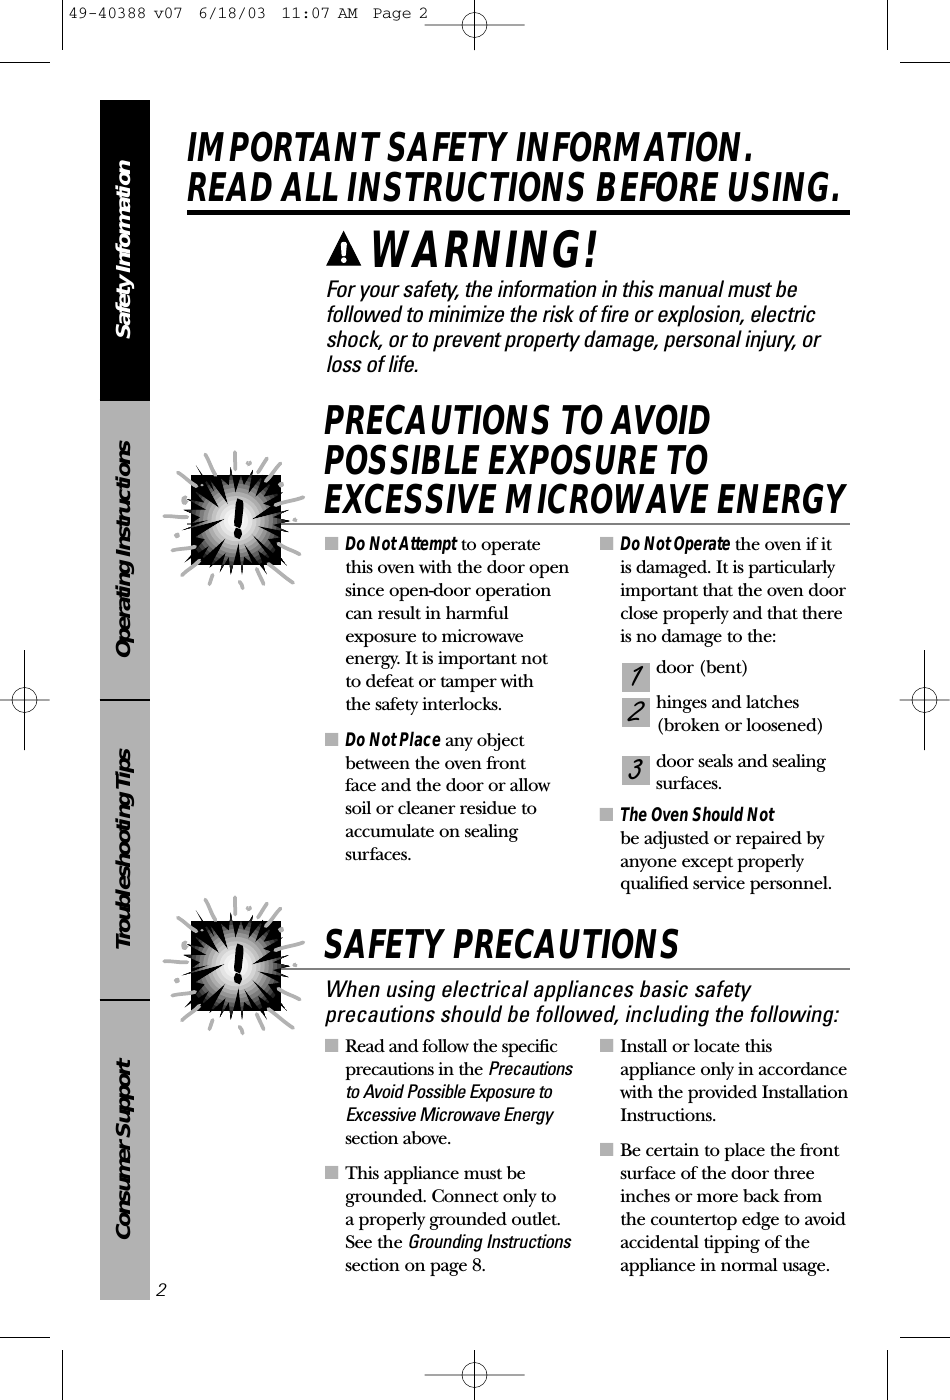 ■Read and follow the specificprecautions in the Precautionsto Avoid Possible Exposure toExcessive Microwave Energysection above.■This appliance must begrounded. Connect only to a properly grounded outlet.See the Grounding Instructionssection on page 8.■Install or locate thisappliance only in accordancewith the provided InstallationInstructions.■Be certain to place the frontsurface of the door threeinches or more back from the countertop edge to avoidaccidental tipping of theappliance in normal usage.■Do Not Attempt to operate this oven with the door opensince open-door operationcan result in harmfulexposure to microwaveenergy. It is important not to defeat or tamper with the safety interlocks.■Do Not Place any objectbetween the oven front face and the door or allowsoil or cleaner residue toaccumulate on sealingsurfaces.■Do Not Operate the oven if it is damaged. It is particularlyimportant that the oven doorclose properly and that thereis no damage to the:door (bent)hinges and latches (broken or loosened)door seals and sealing surfaces.■The Oven Should Not be adjusted or repaired byanyone except properlyqualified service personnel.321PRECAUTIONS TO AVOIDPOSSIBLE EXPOSURE TOEXCESSIVE MICROWAVE ENERGYSafety InformationOperating InstructionsTroubleshooting TipsConsumer SupportIMPORTANT SAFETY INFORMATION.READ ALL INSTRUCTIONS BEFORE USING.2For your safety, the information in this manual must befollowed to minimize the risk of fire or explosion, electricshock, or to prevent property damage, personal injury, or loss of life.When using electrical appliances basic safetyprecautions should be followed, including the following:SAFETY PRECAUTIONSWARNING! 49-40388 v07  6/18/03  11:07 AM  Page 2